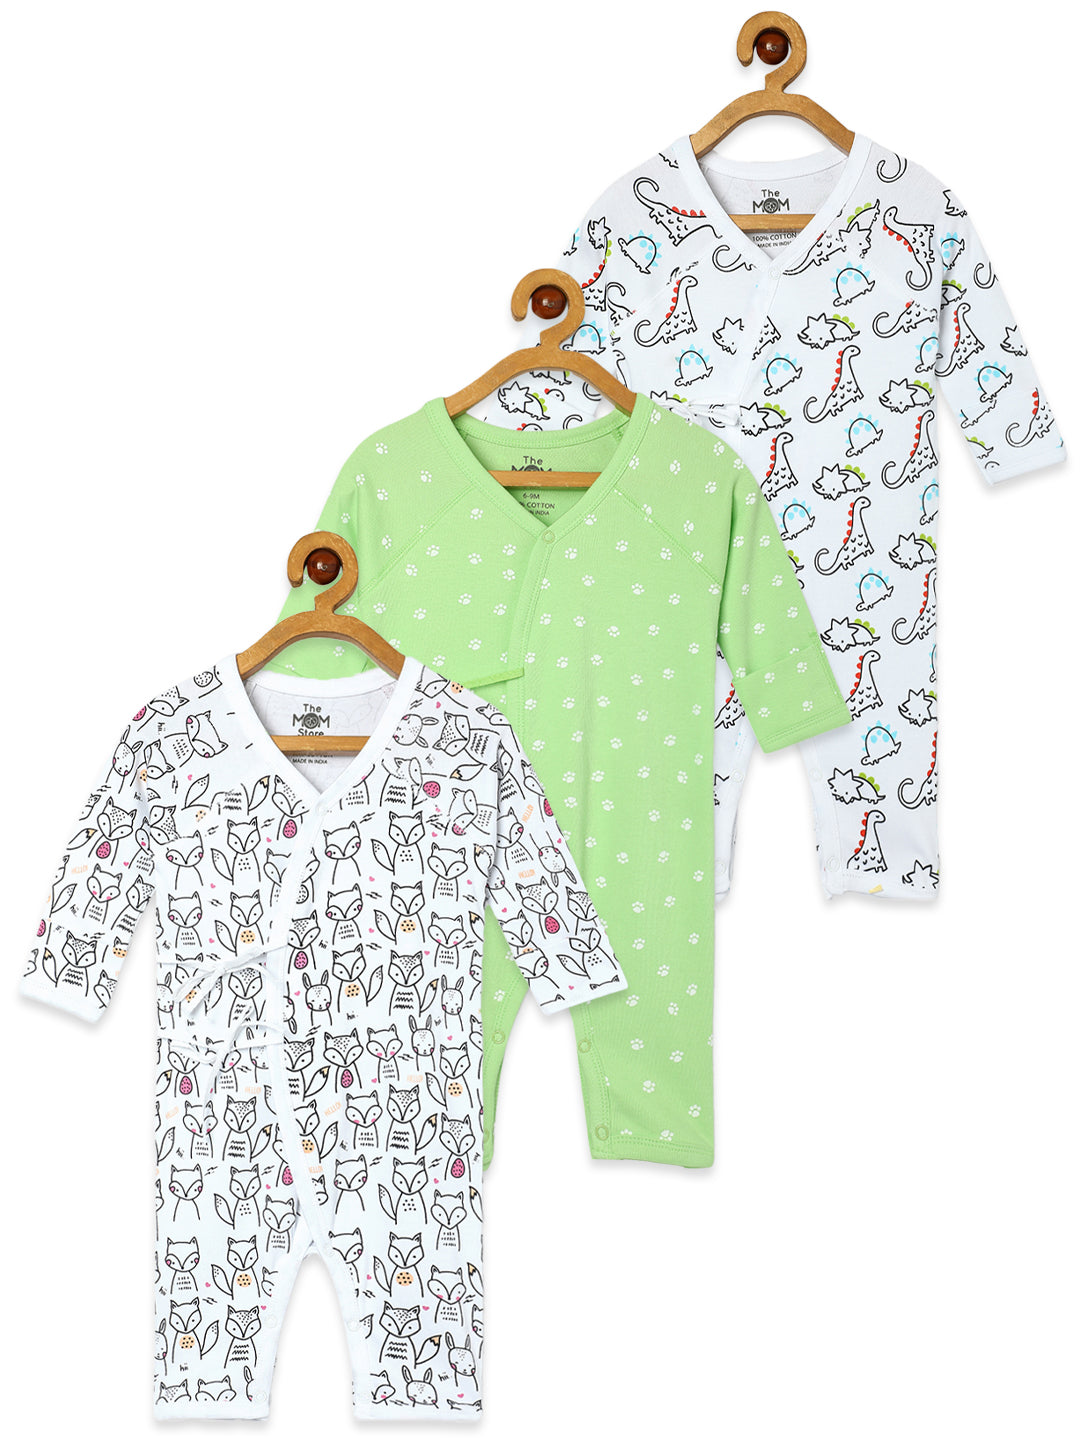 Jabla Infant Romper Combo Of 3: Dinos On The Round- Foxier Than The Fox-Staying Pawsitive